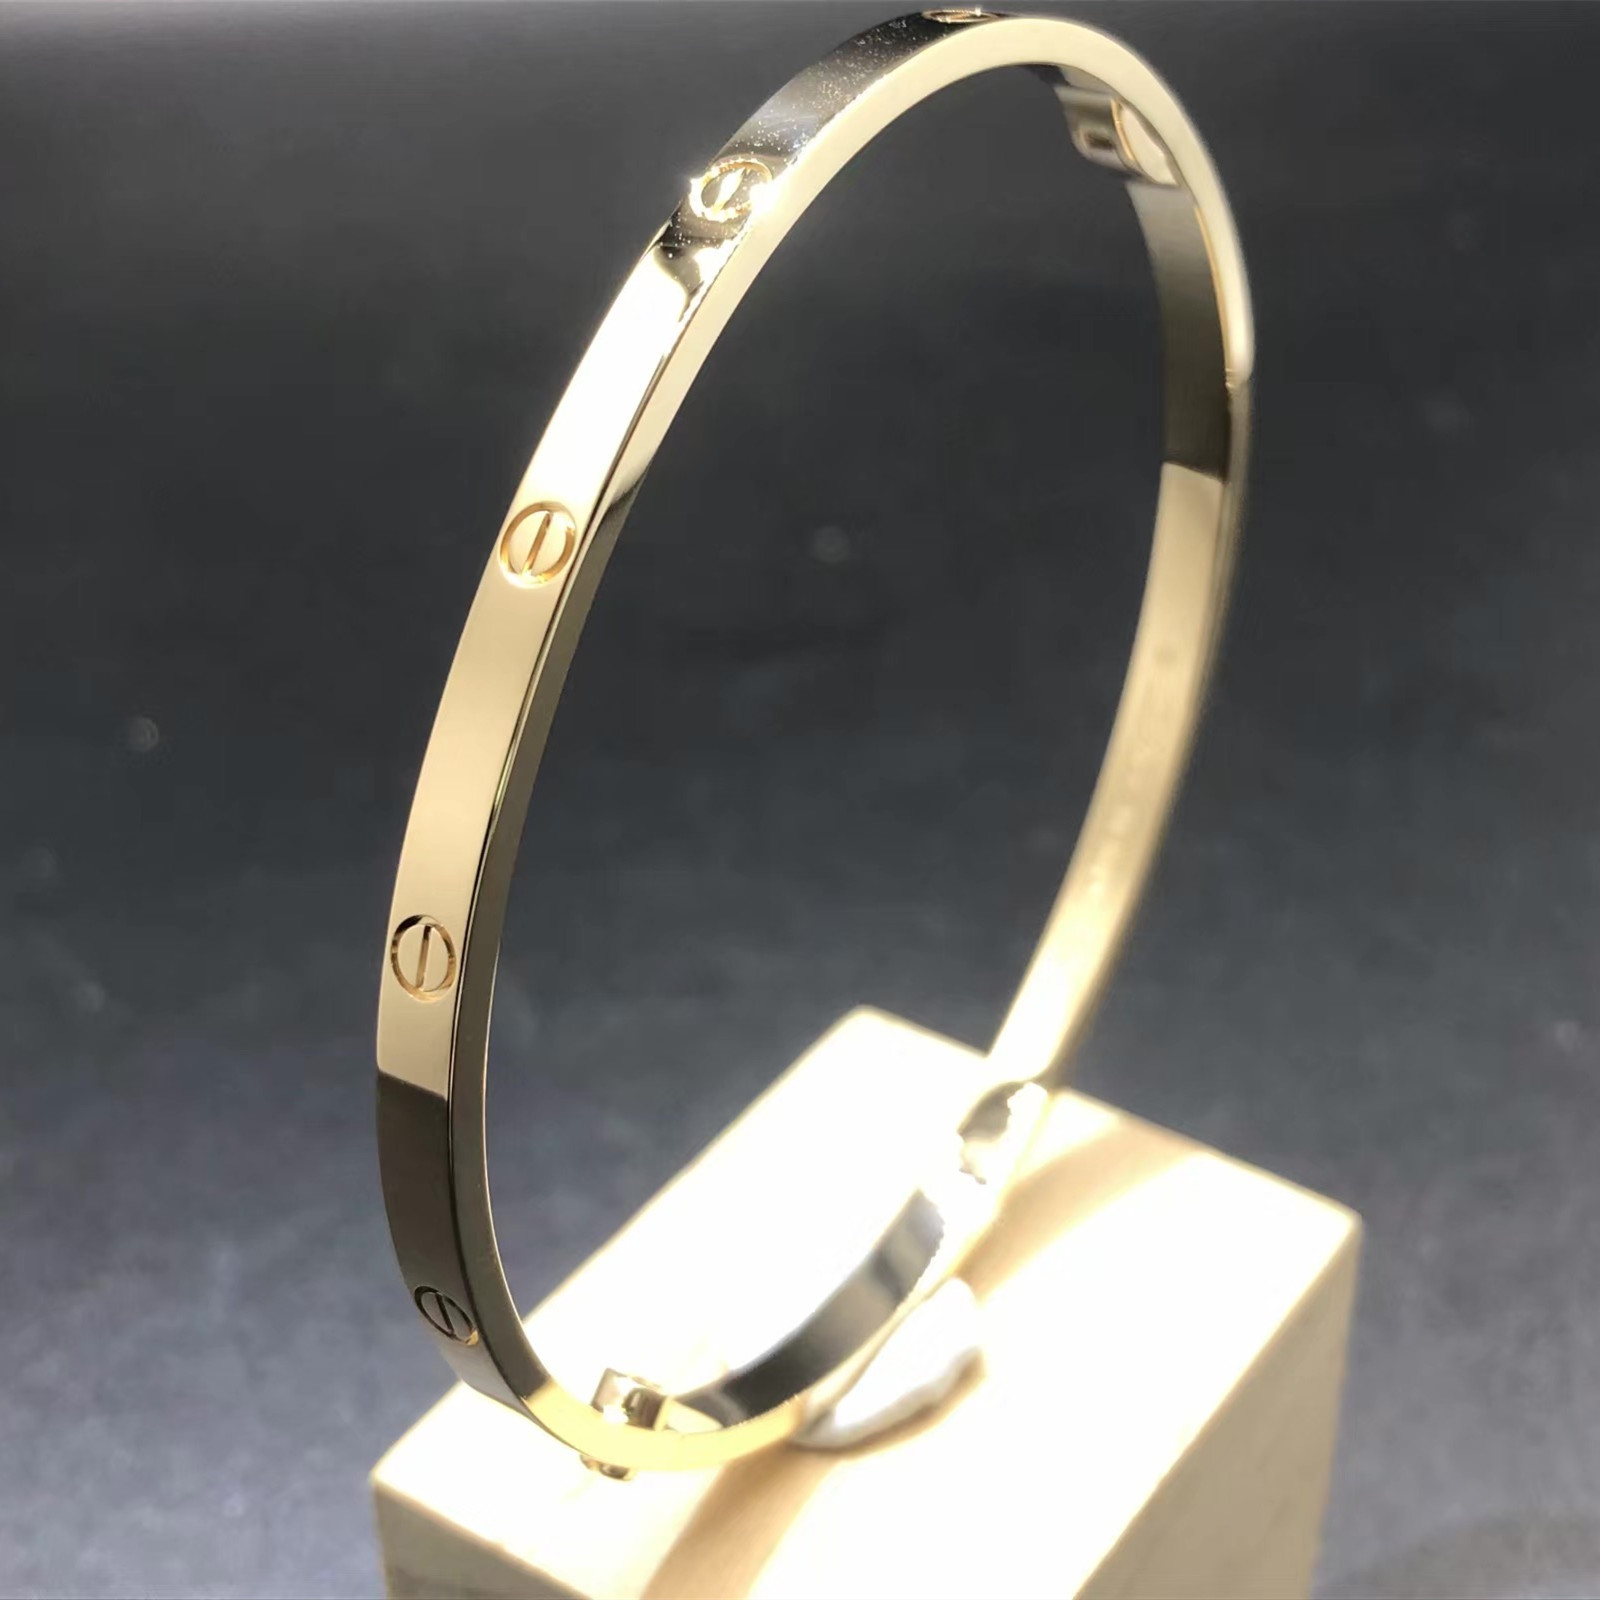 Cartier Love Small Model Bracelet Custom Made in Solid 18K Yellow Gold